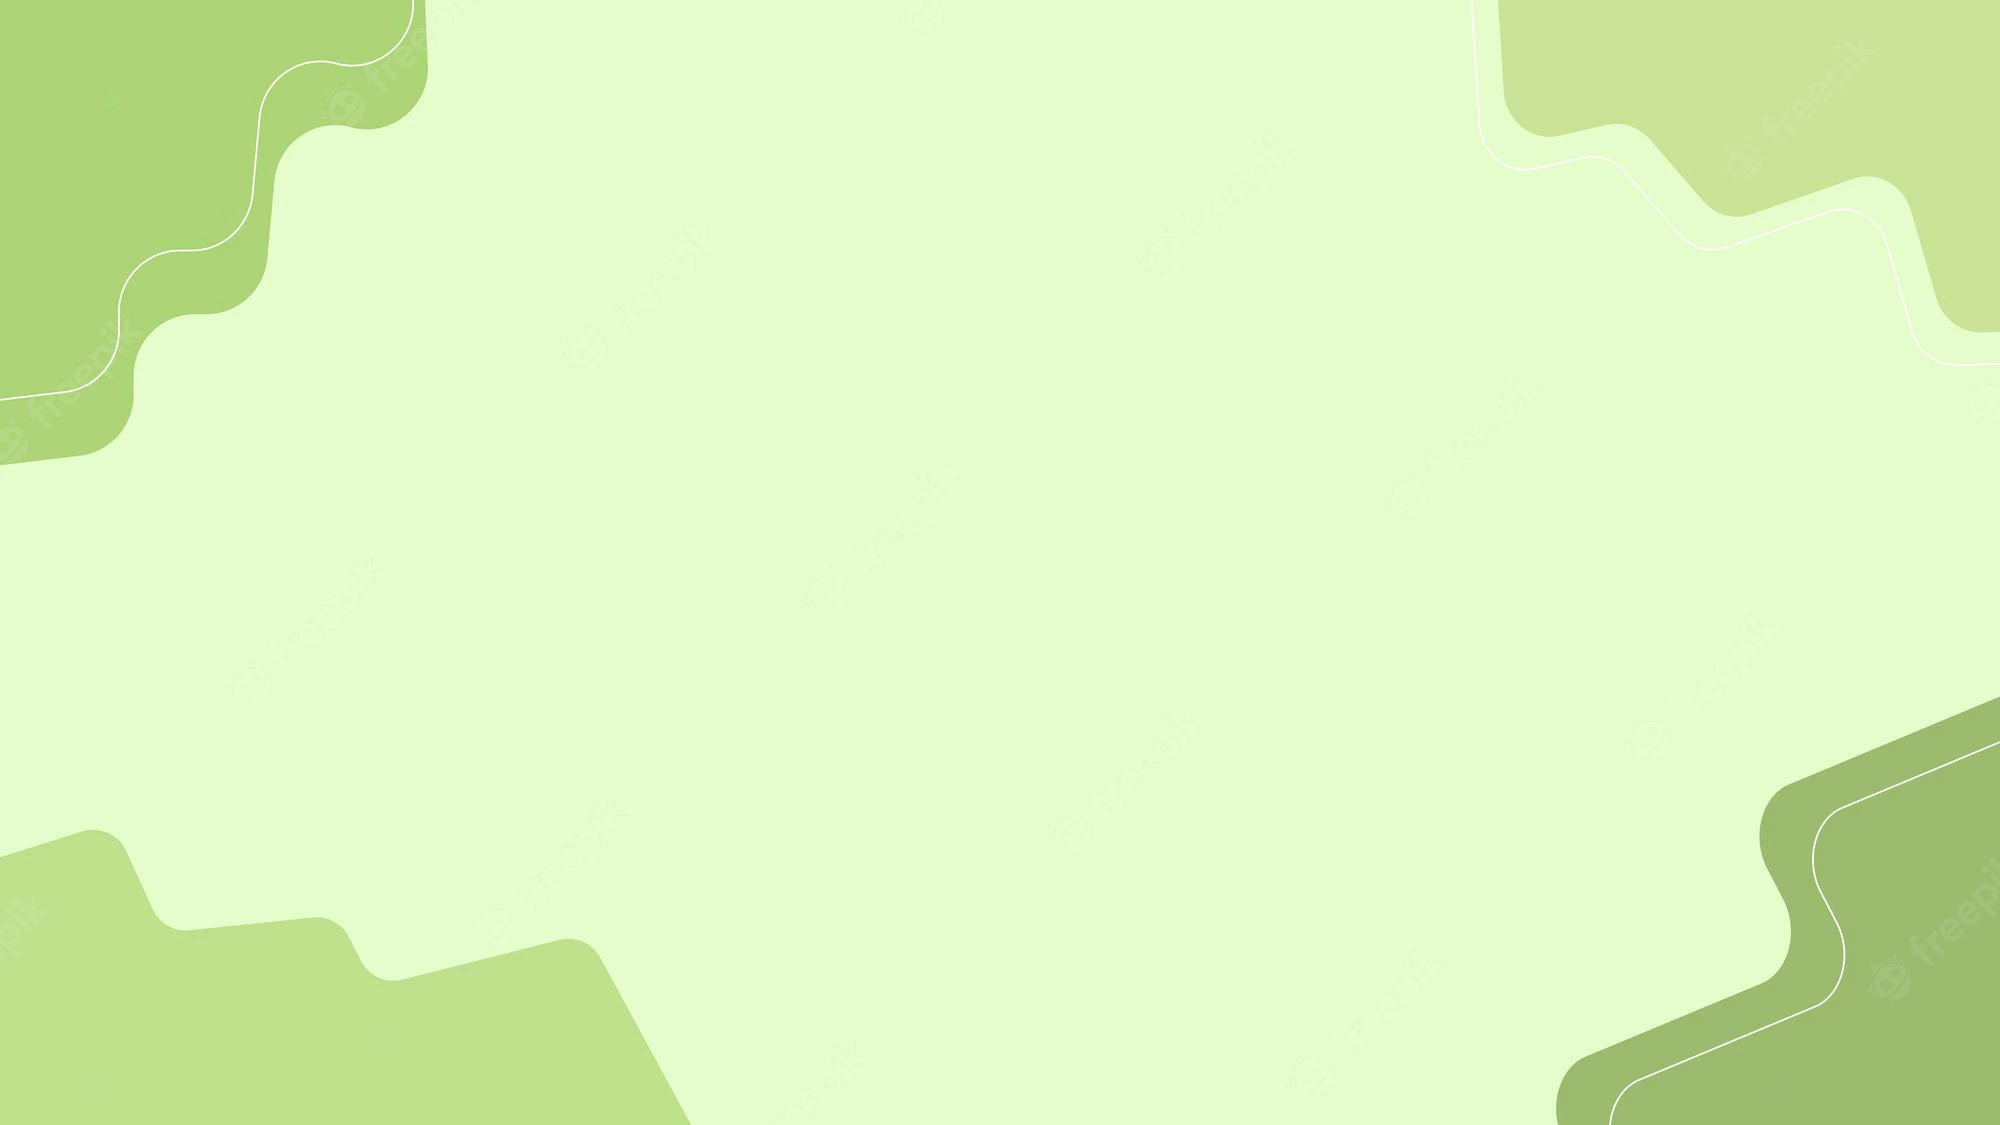 A light green background with a wavy pattern on the left and right sides. - Sage green